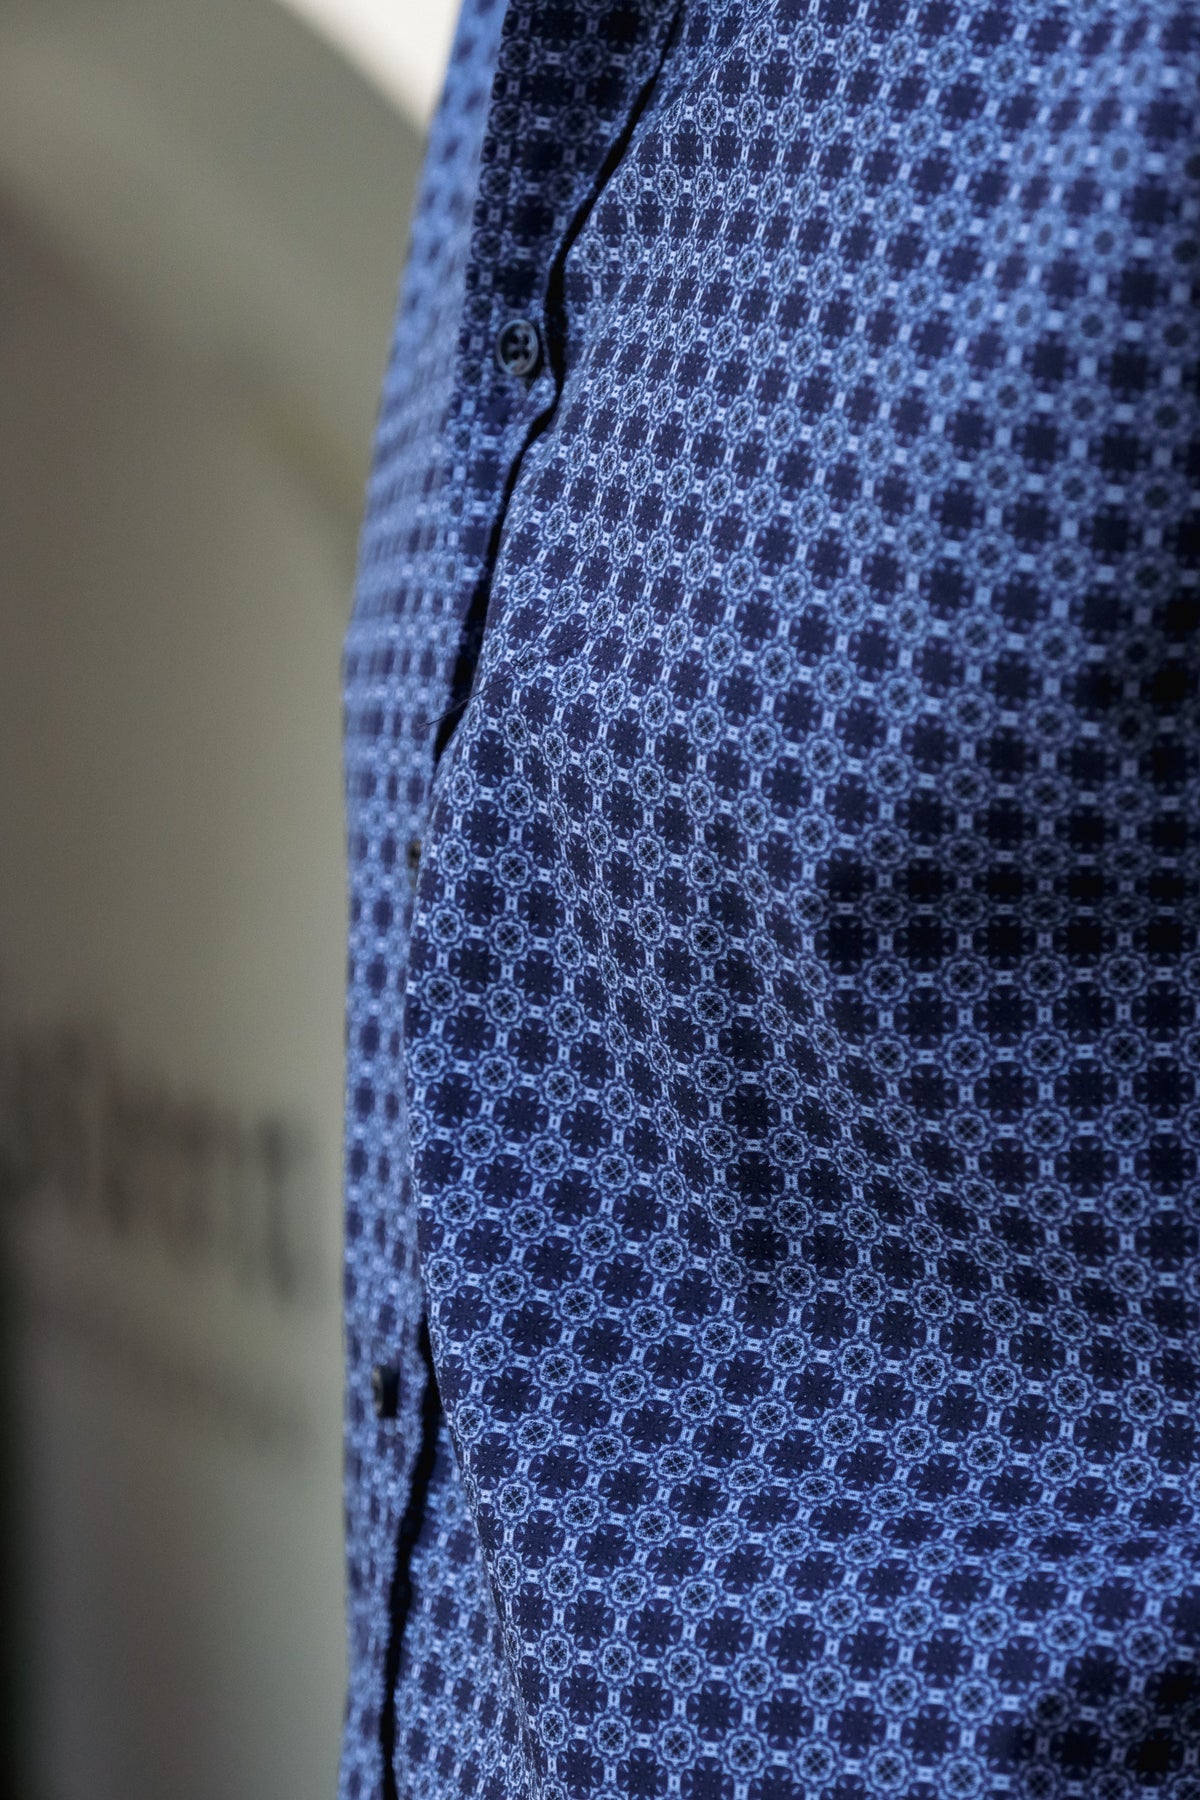 Printed casual shirt with graphic pattern in blue/white (Art. 2115-C)